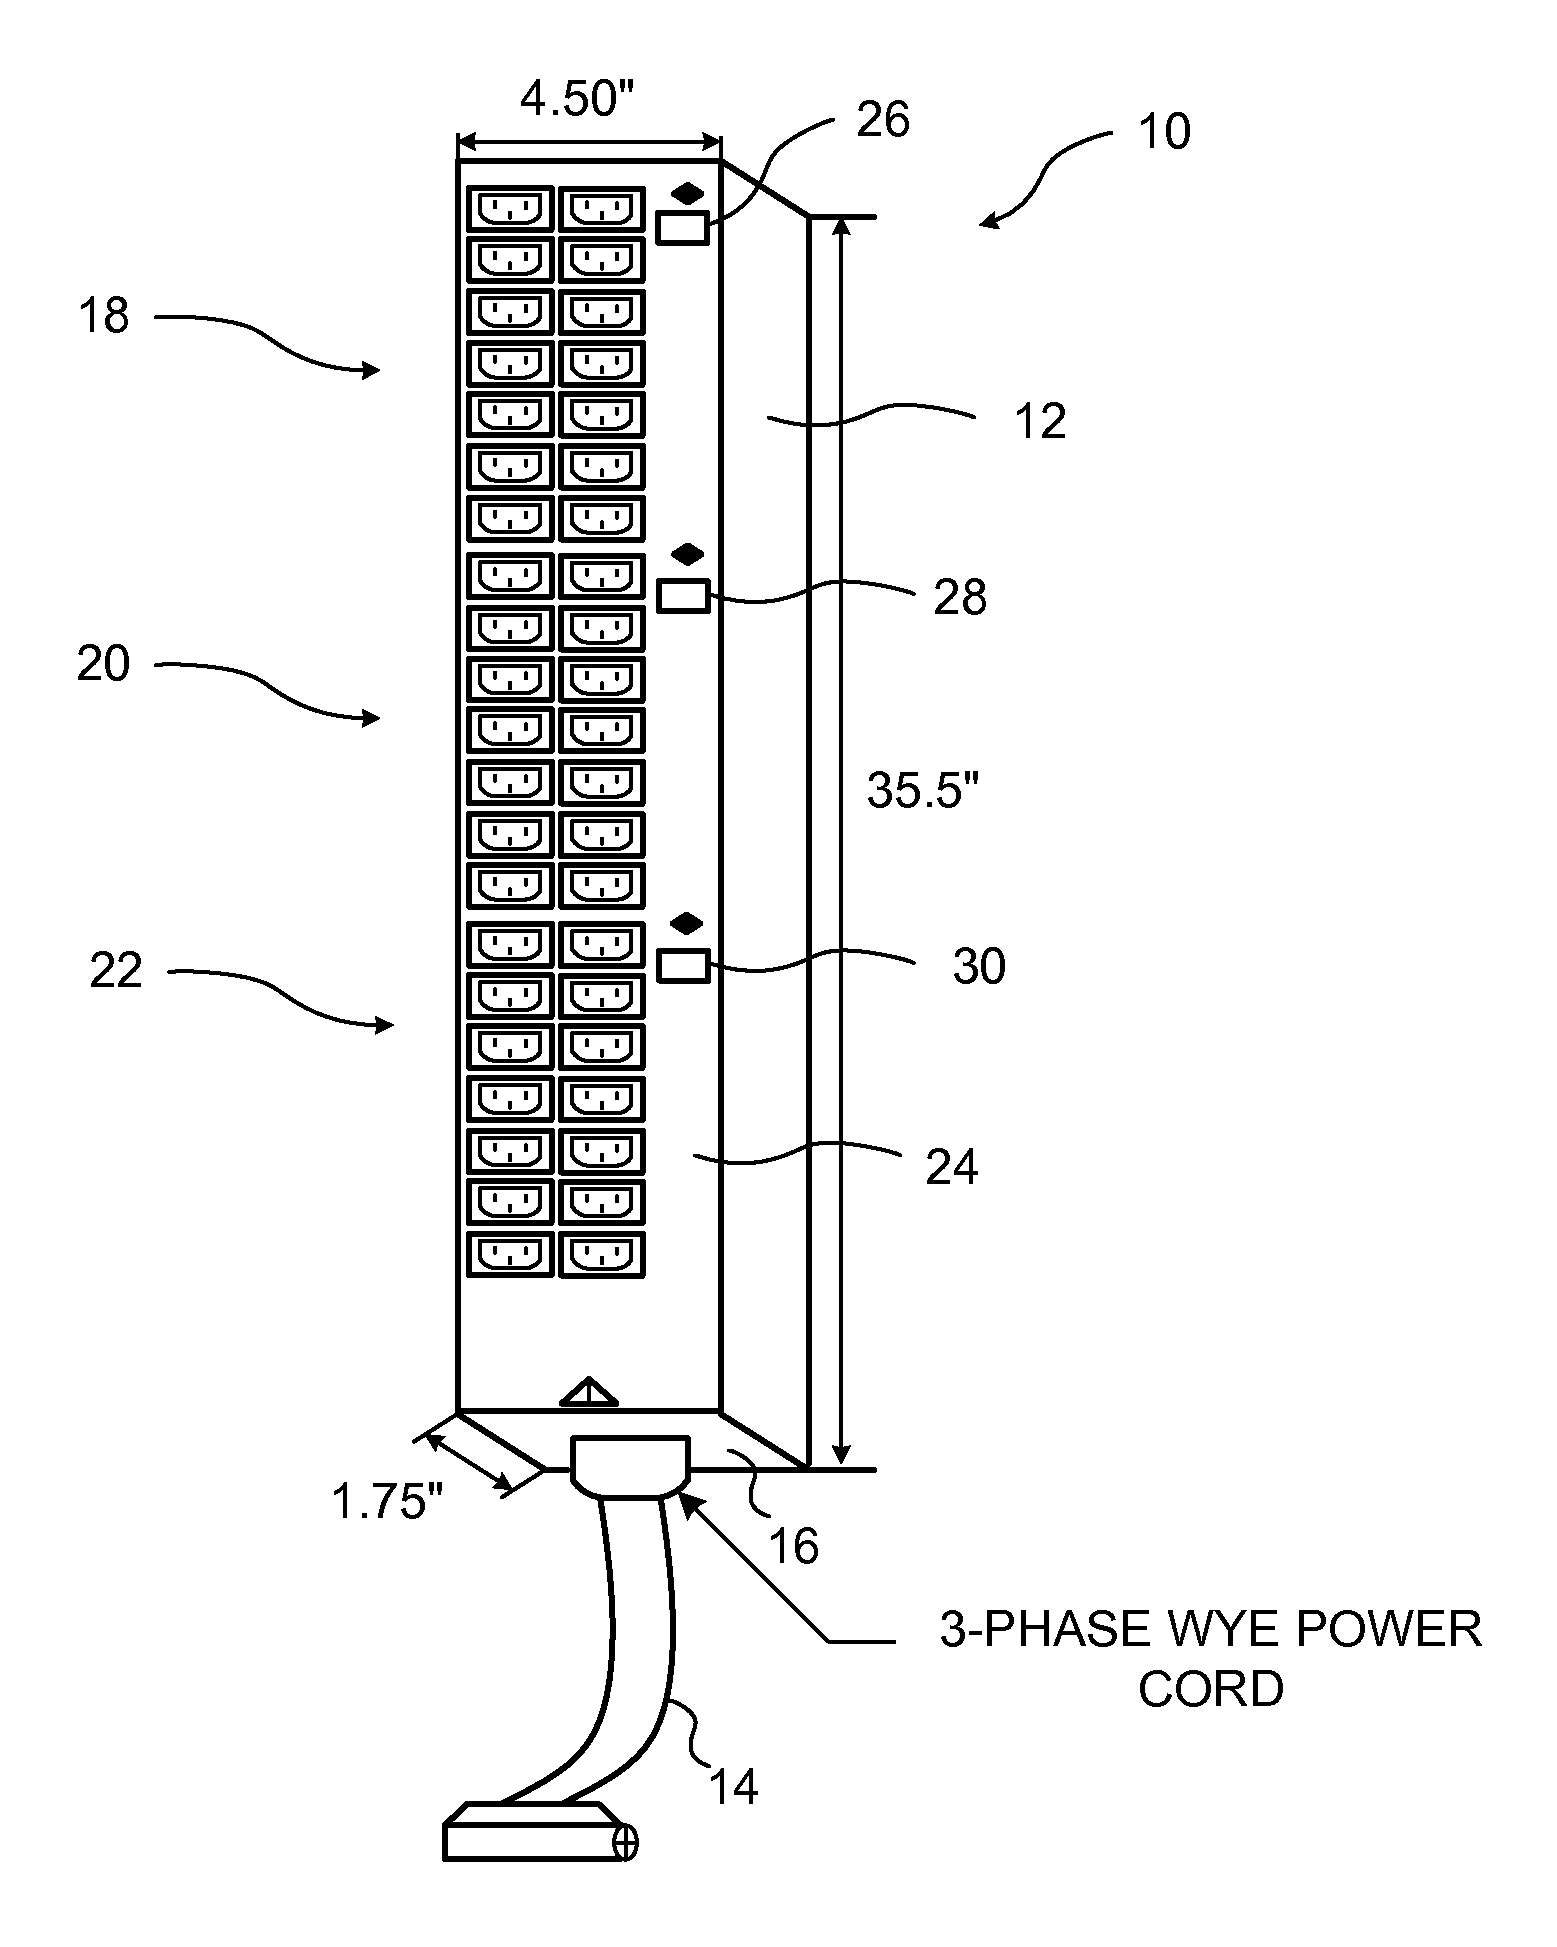 Polyphase power distribution and monitoring apparatus